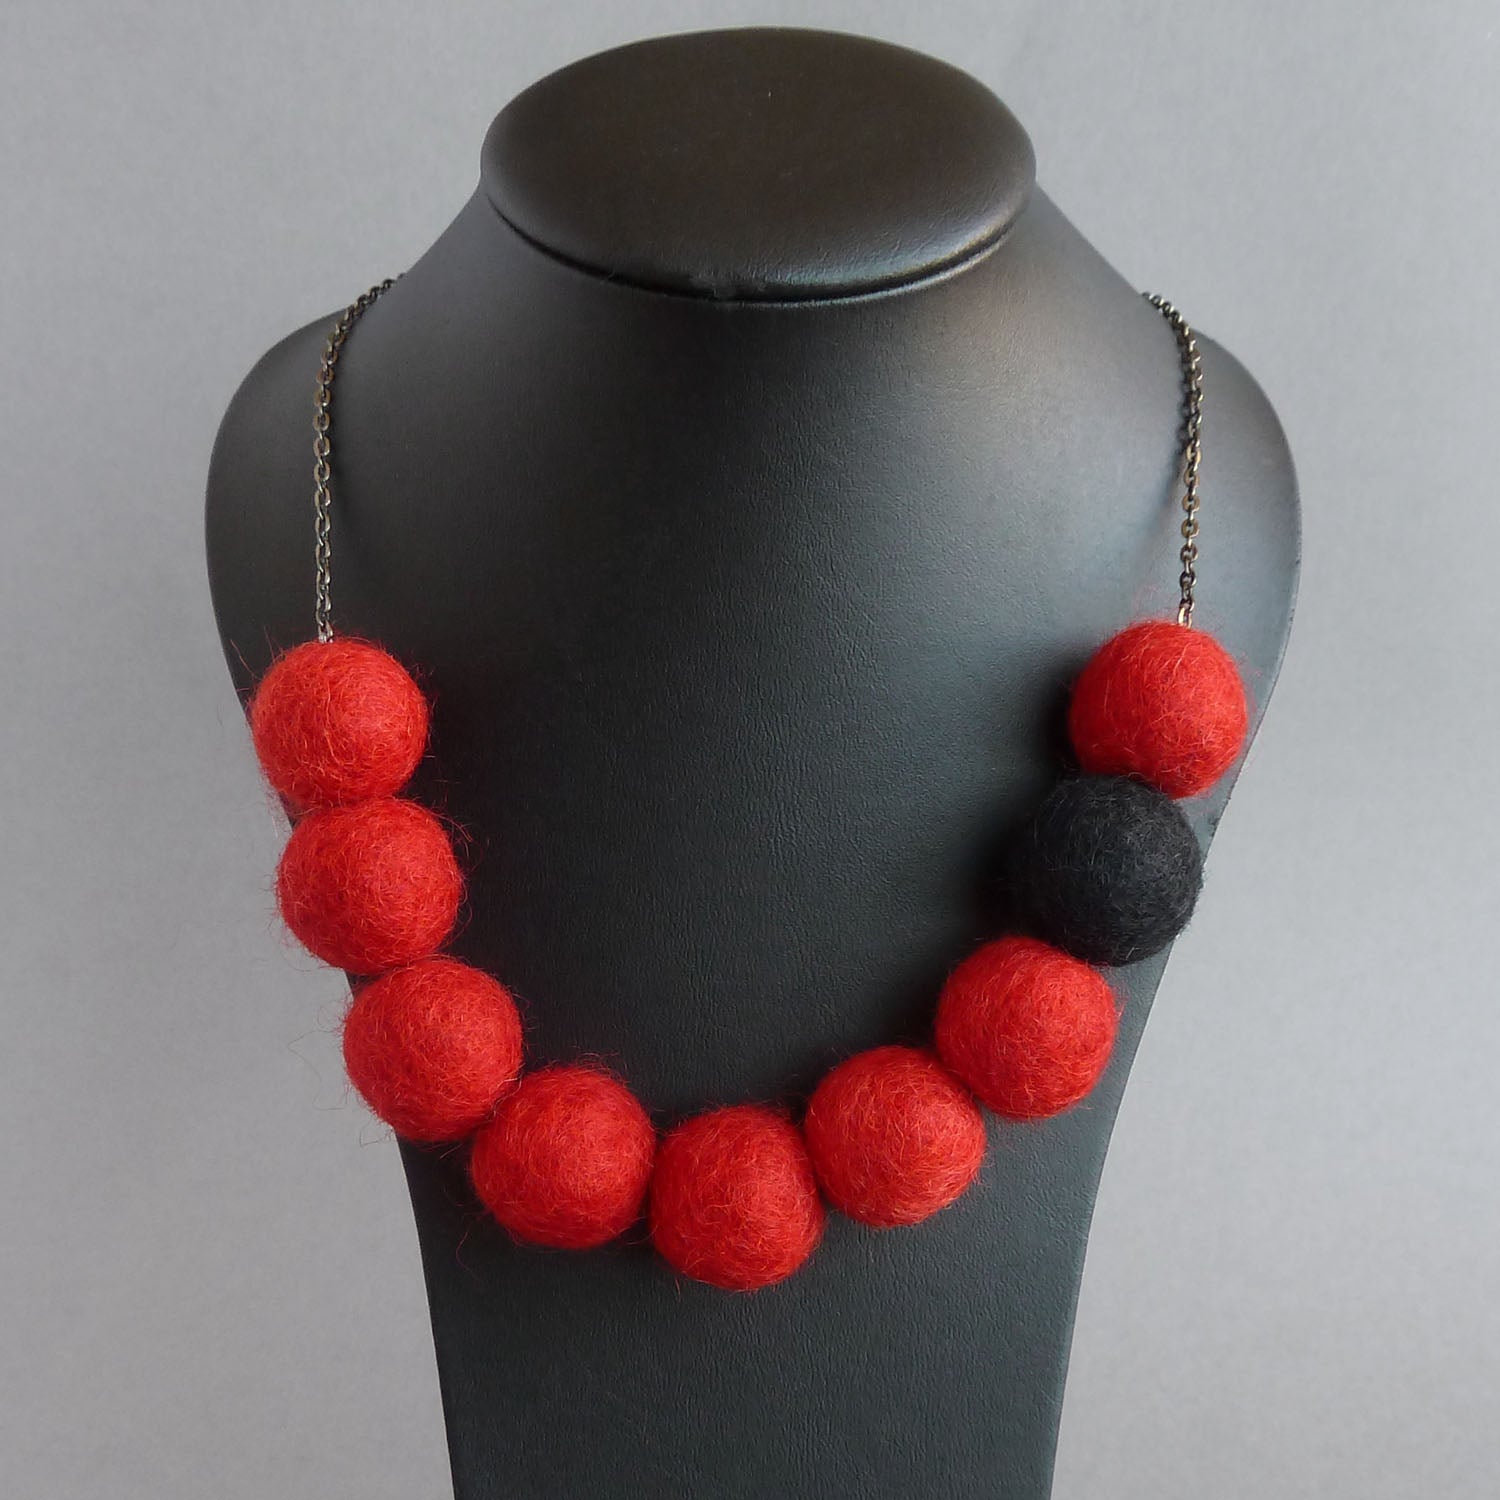 Chunky red felt necklace